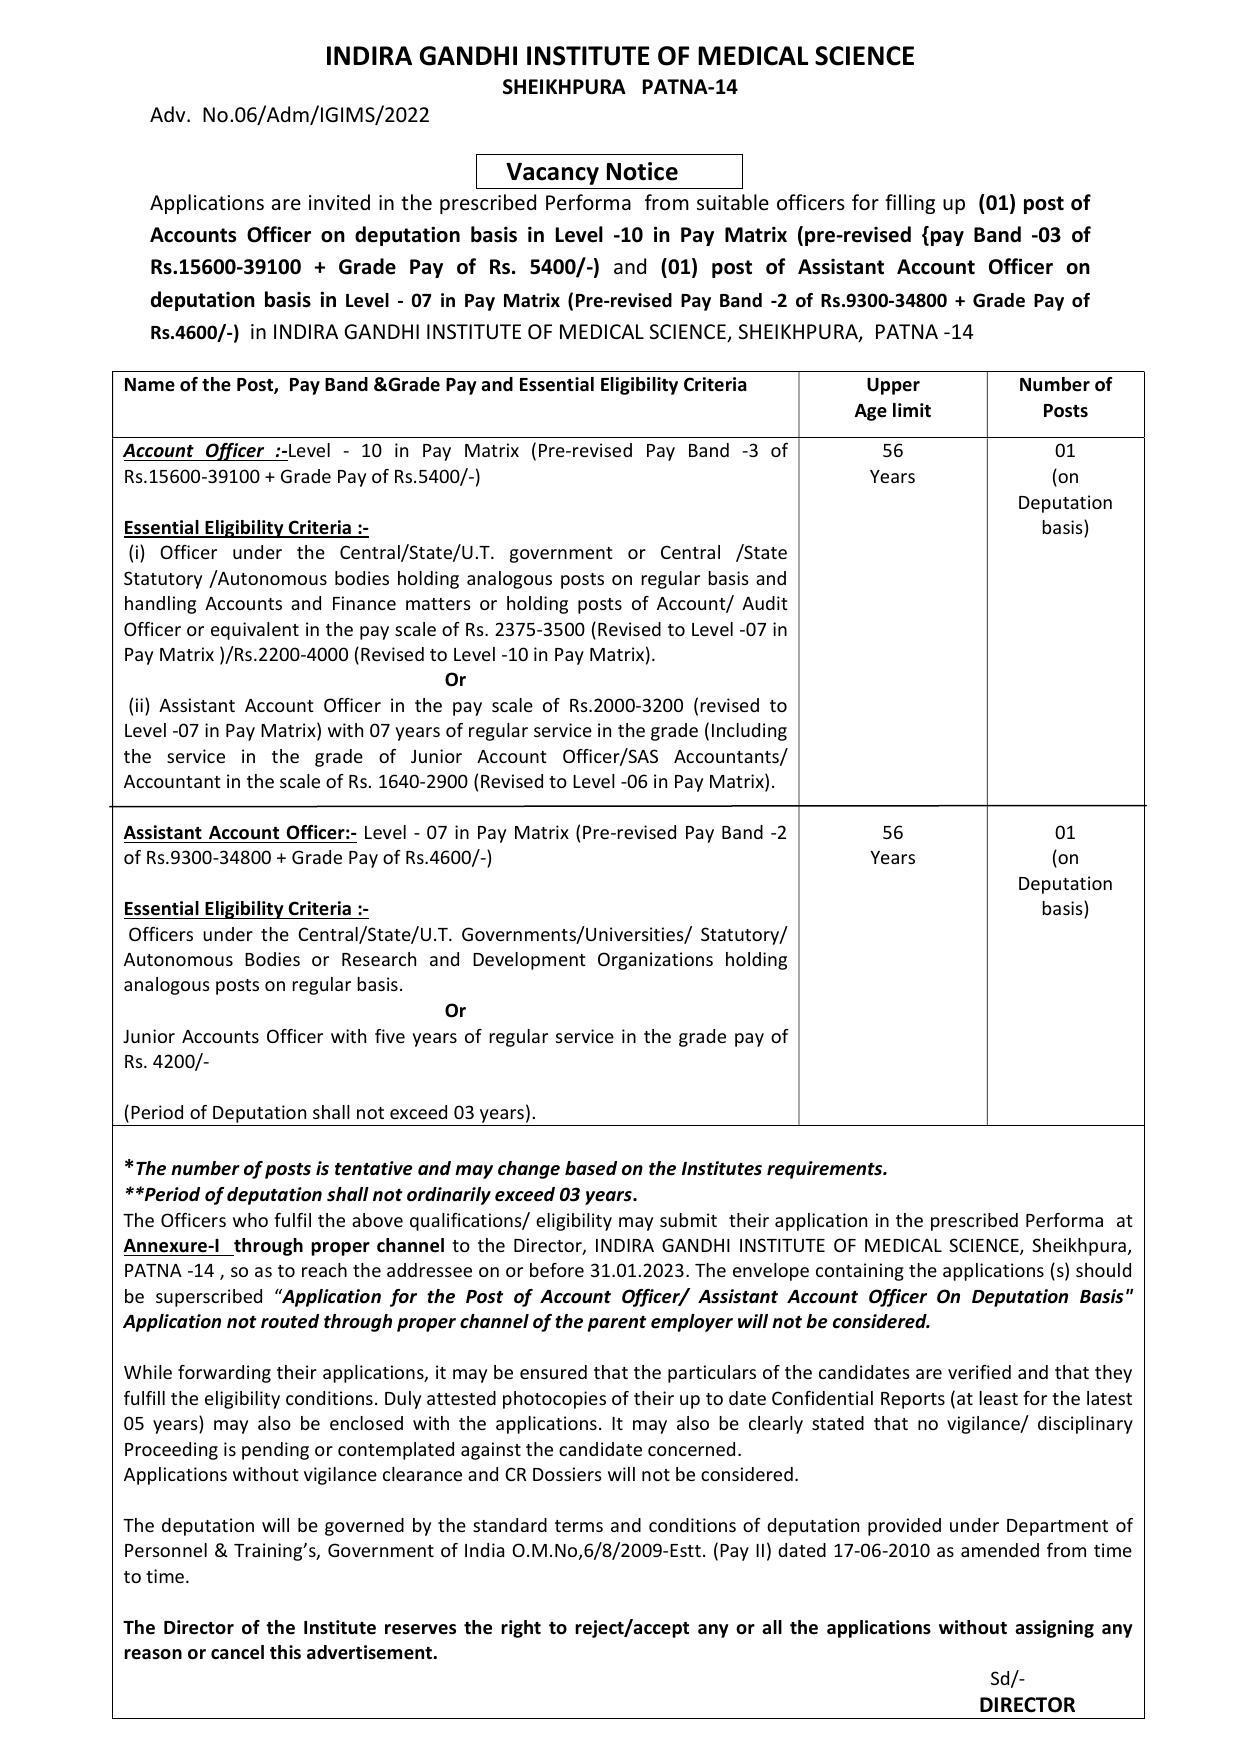 IGIMS Invites Application for Account Officer, Assistant Account Officer Recruitment 2022 - Page 1